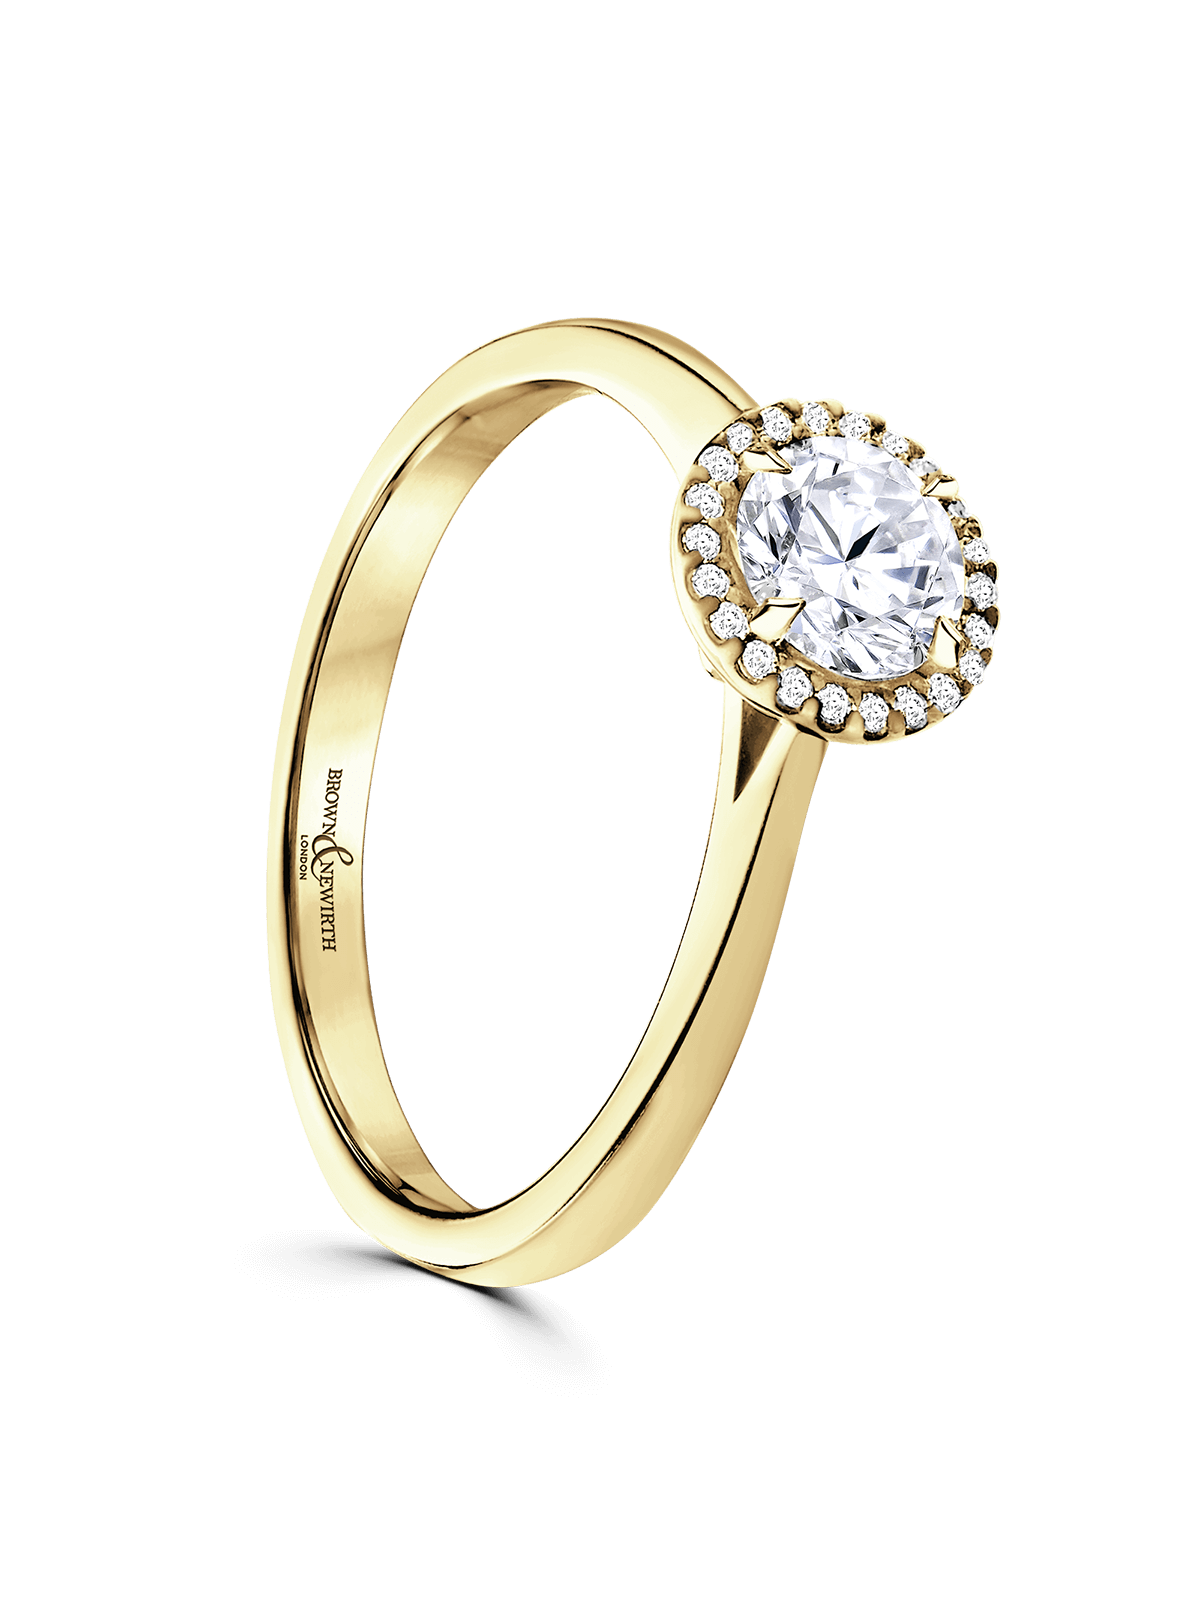 Brown & Newirth Celeste 0.50ct Brilliant Cut Certificated Diamond Halo Engagement Ring in 18ct Yellow Gold